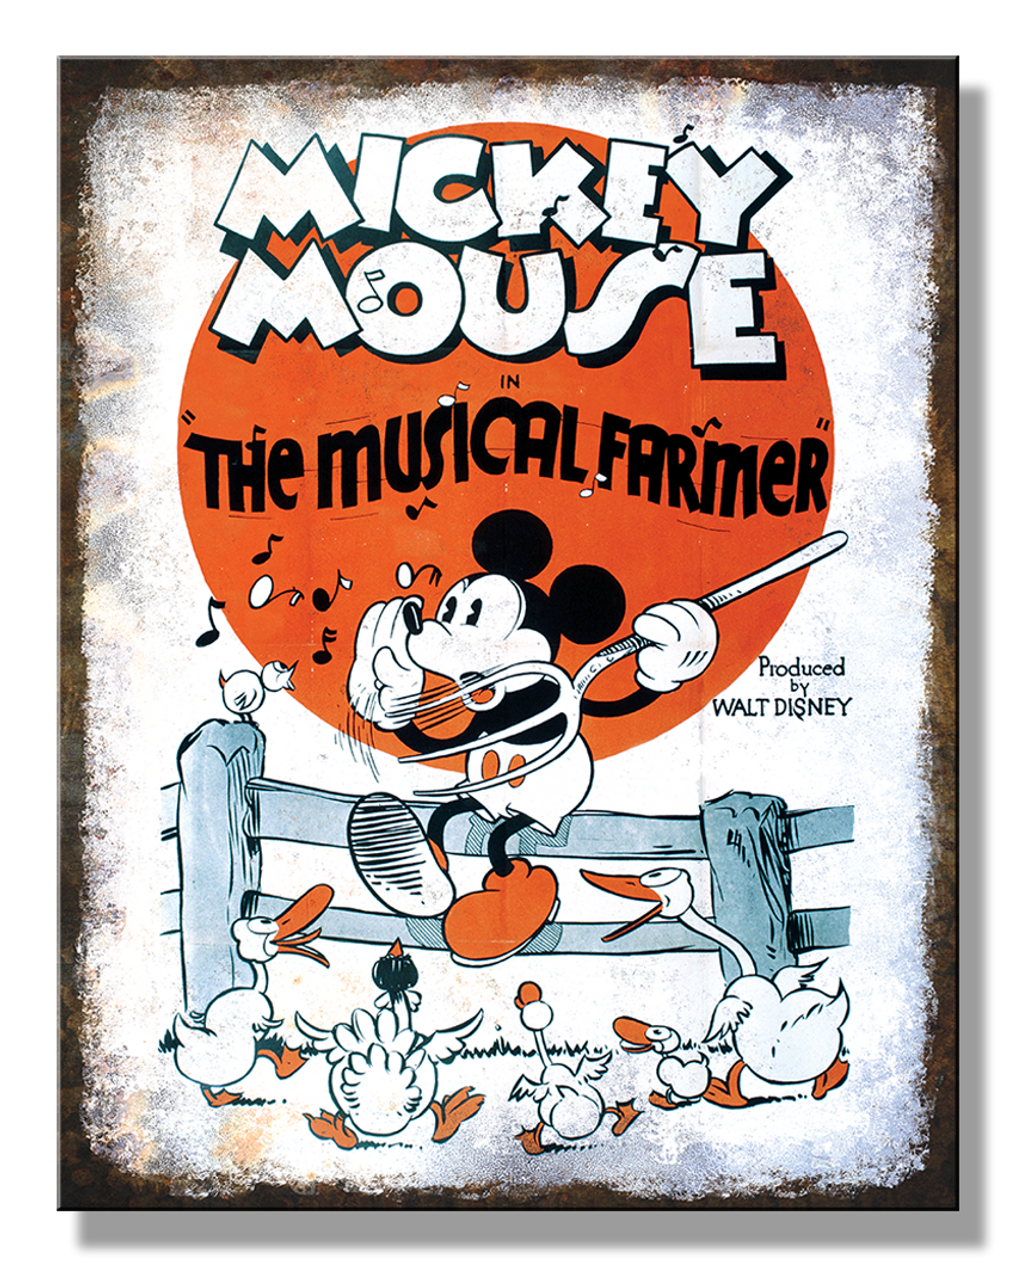 Mickey Mouse - Musical Farmer 12.5" x 16" Distressed Metal Tin Sign - 2853